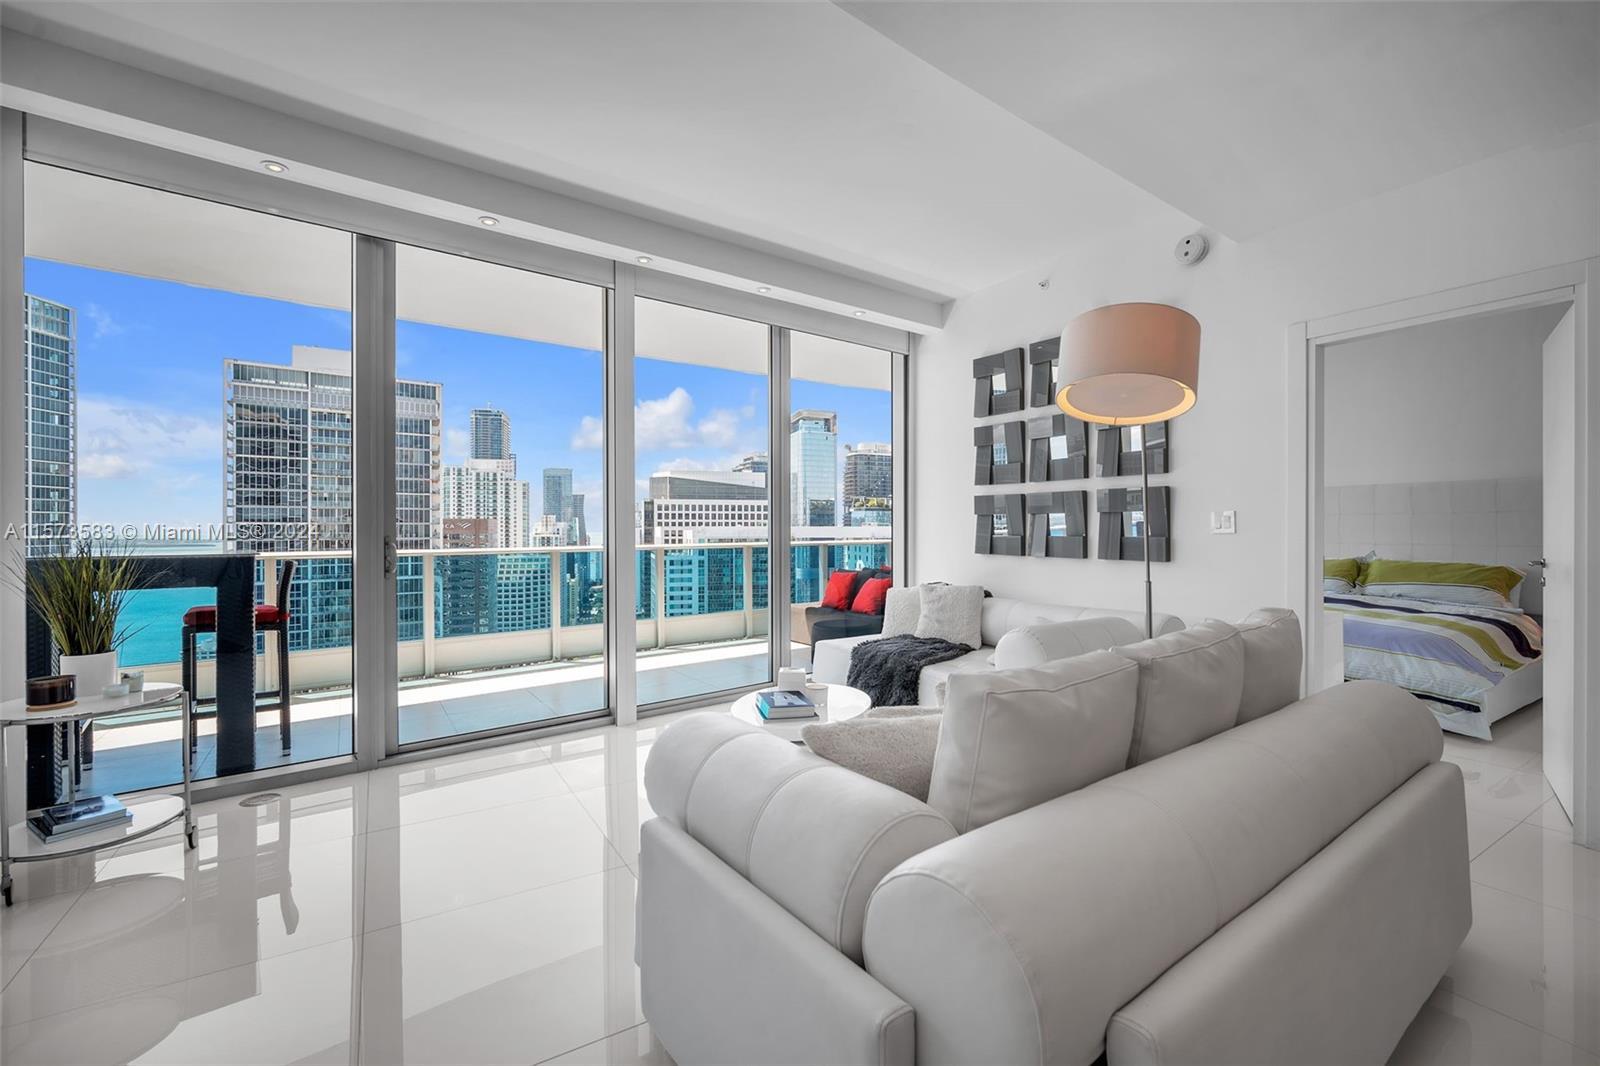 Immerse yourself in luxury in this stunning 2-bed, 2.5-bath home at the incomparable Epic Miami. Flo